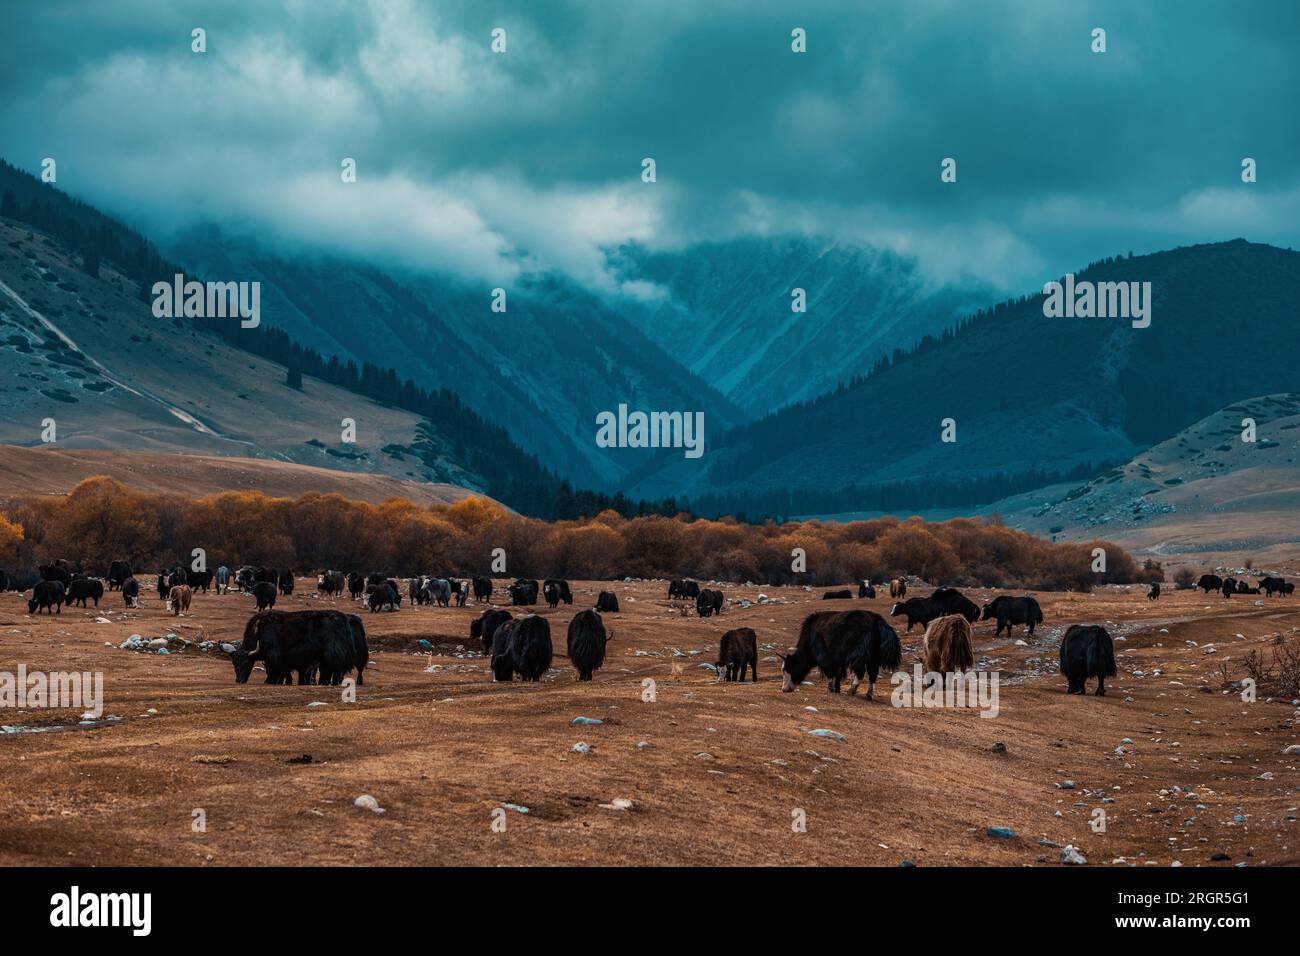 A herd of yaks in the mountains Stock Photo